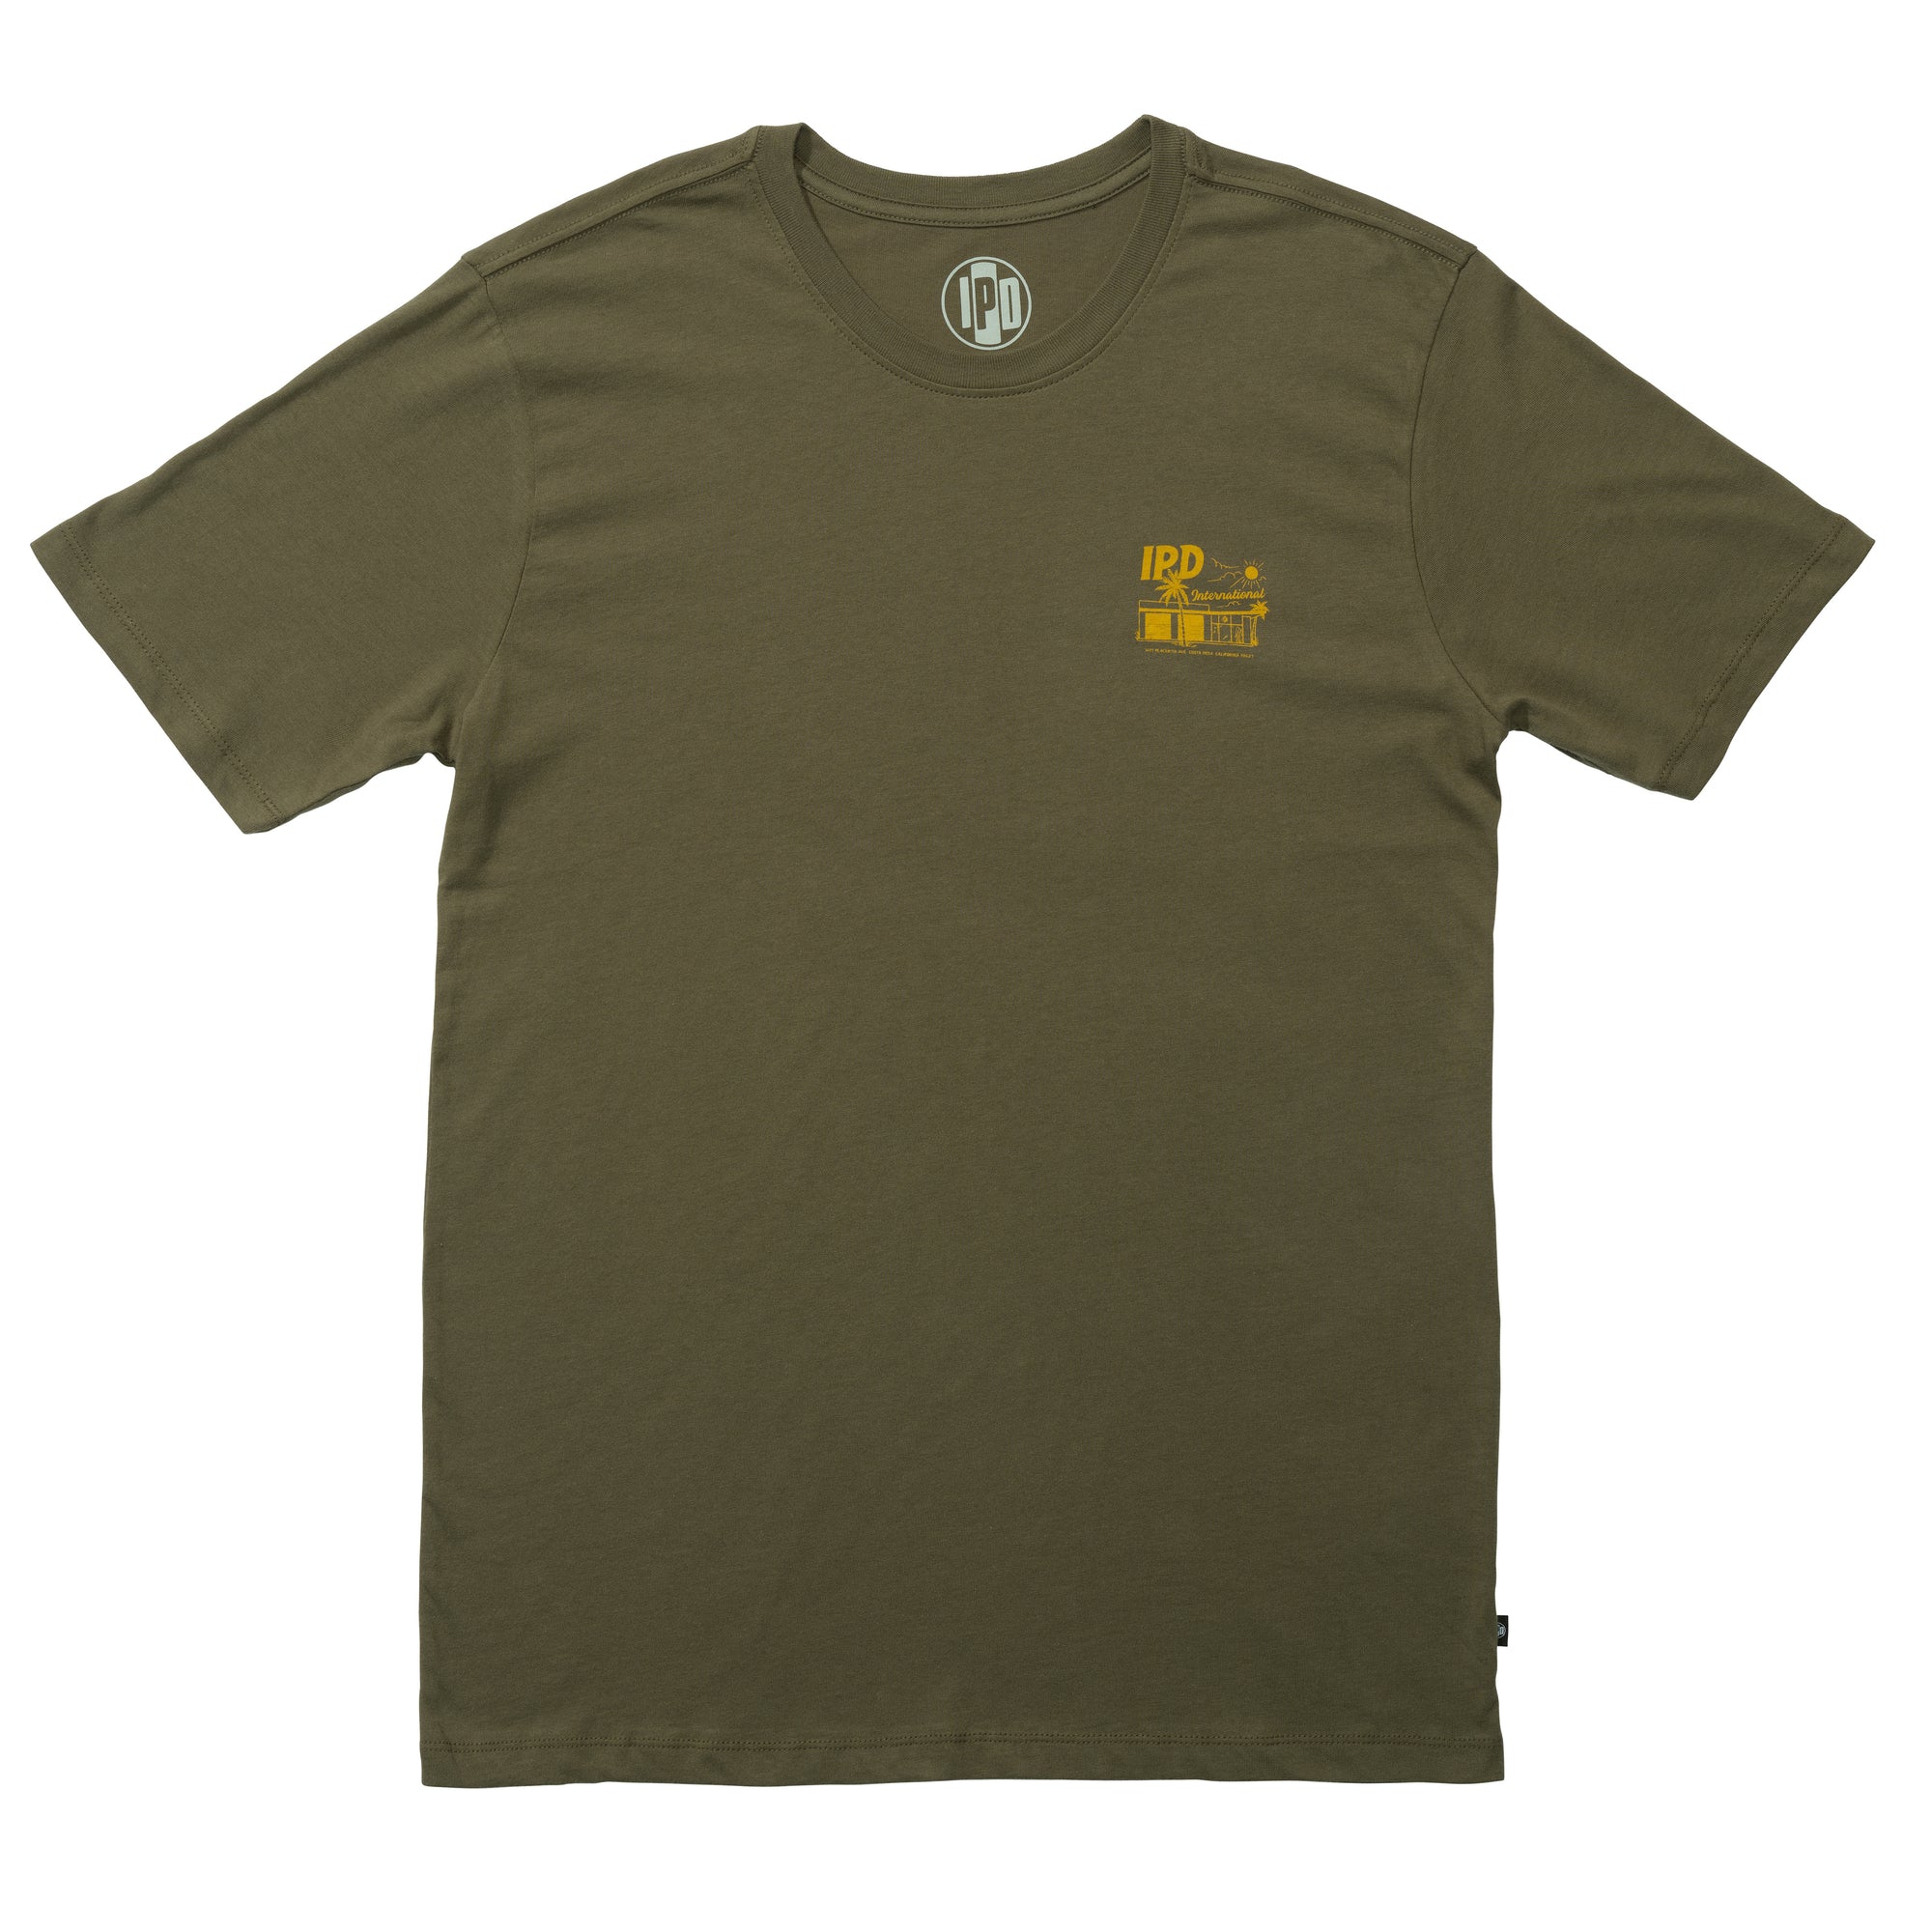 Front view of a dark olive green polyester water resistant short sleeve tee with a small orange I P D logo over the heart.